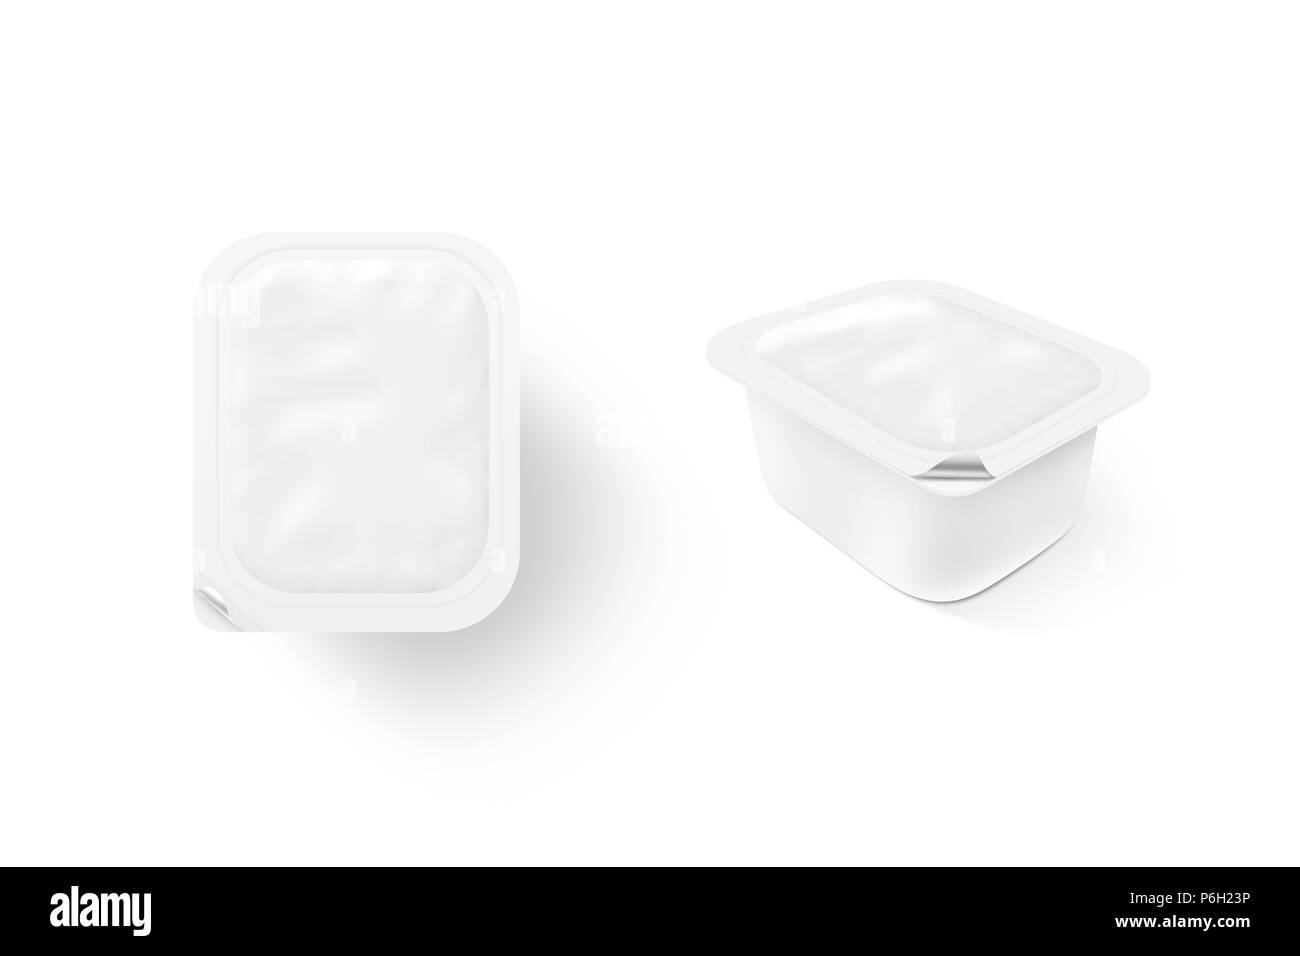 Blank white sauce box mock up stand isolated. Sause clear jar mockup, 2 sides. Sour cream empty box design presentation. Butter packaging. Jam bank template. Pudding box pack. Butter plastic package. Stock Photo